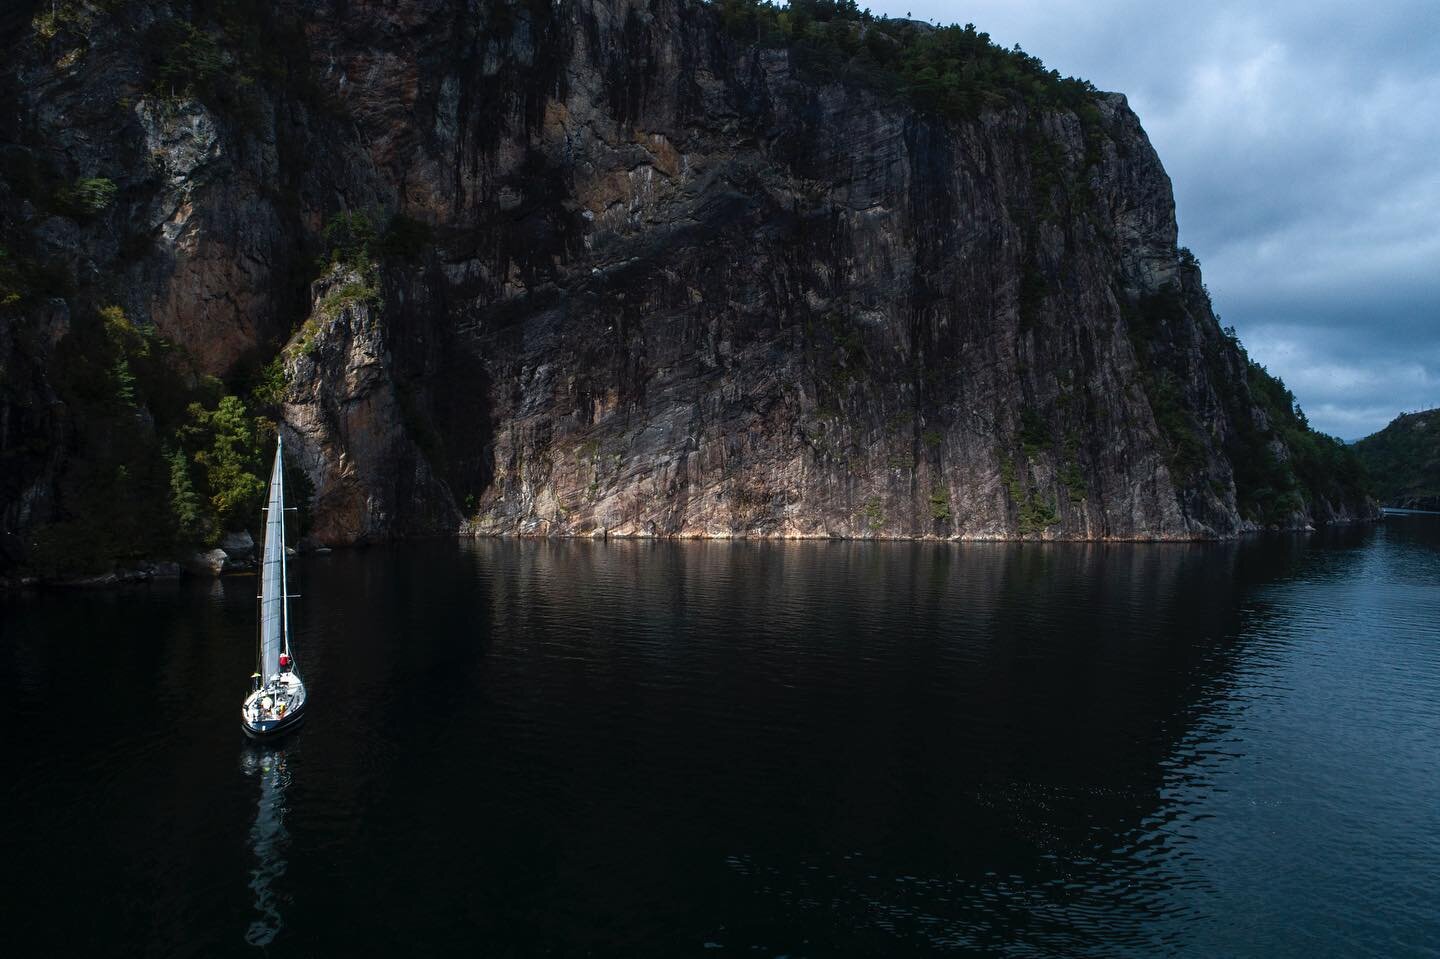 A sliver of light gives glow to the steep wall. Cutting in close in deep northern fjords :) 
Isbjorn @59northsailing 

#isbjornsailing #norway #norge #seil #seilnorge #fjord #fjords #fjordsofnorway #sail #sailing #sailinglife #utno #utinaturen #norve